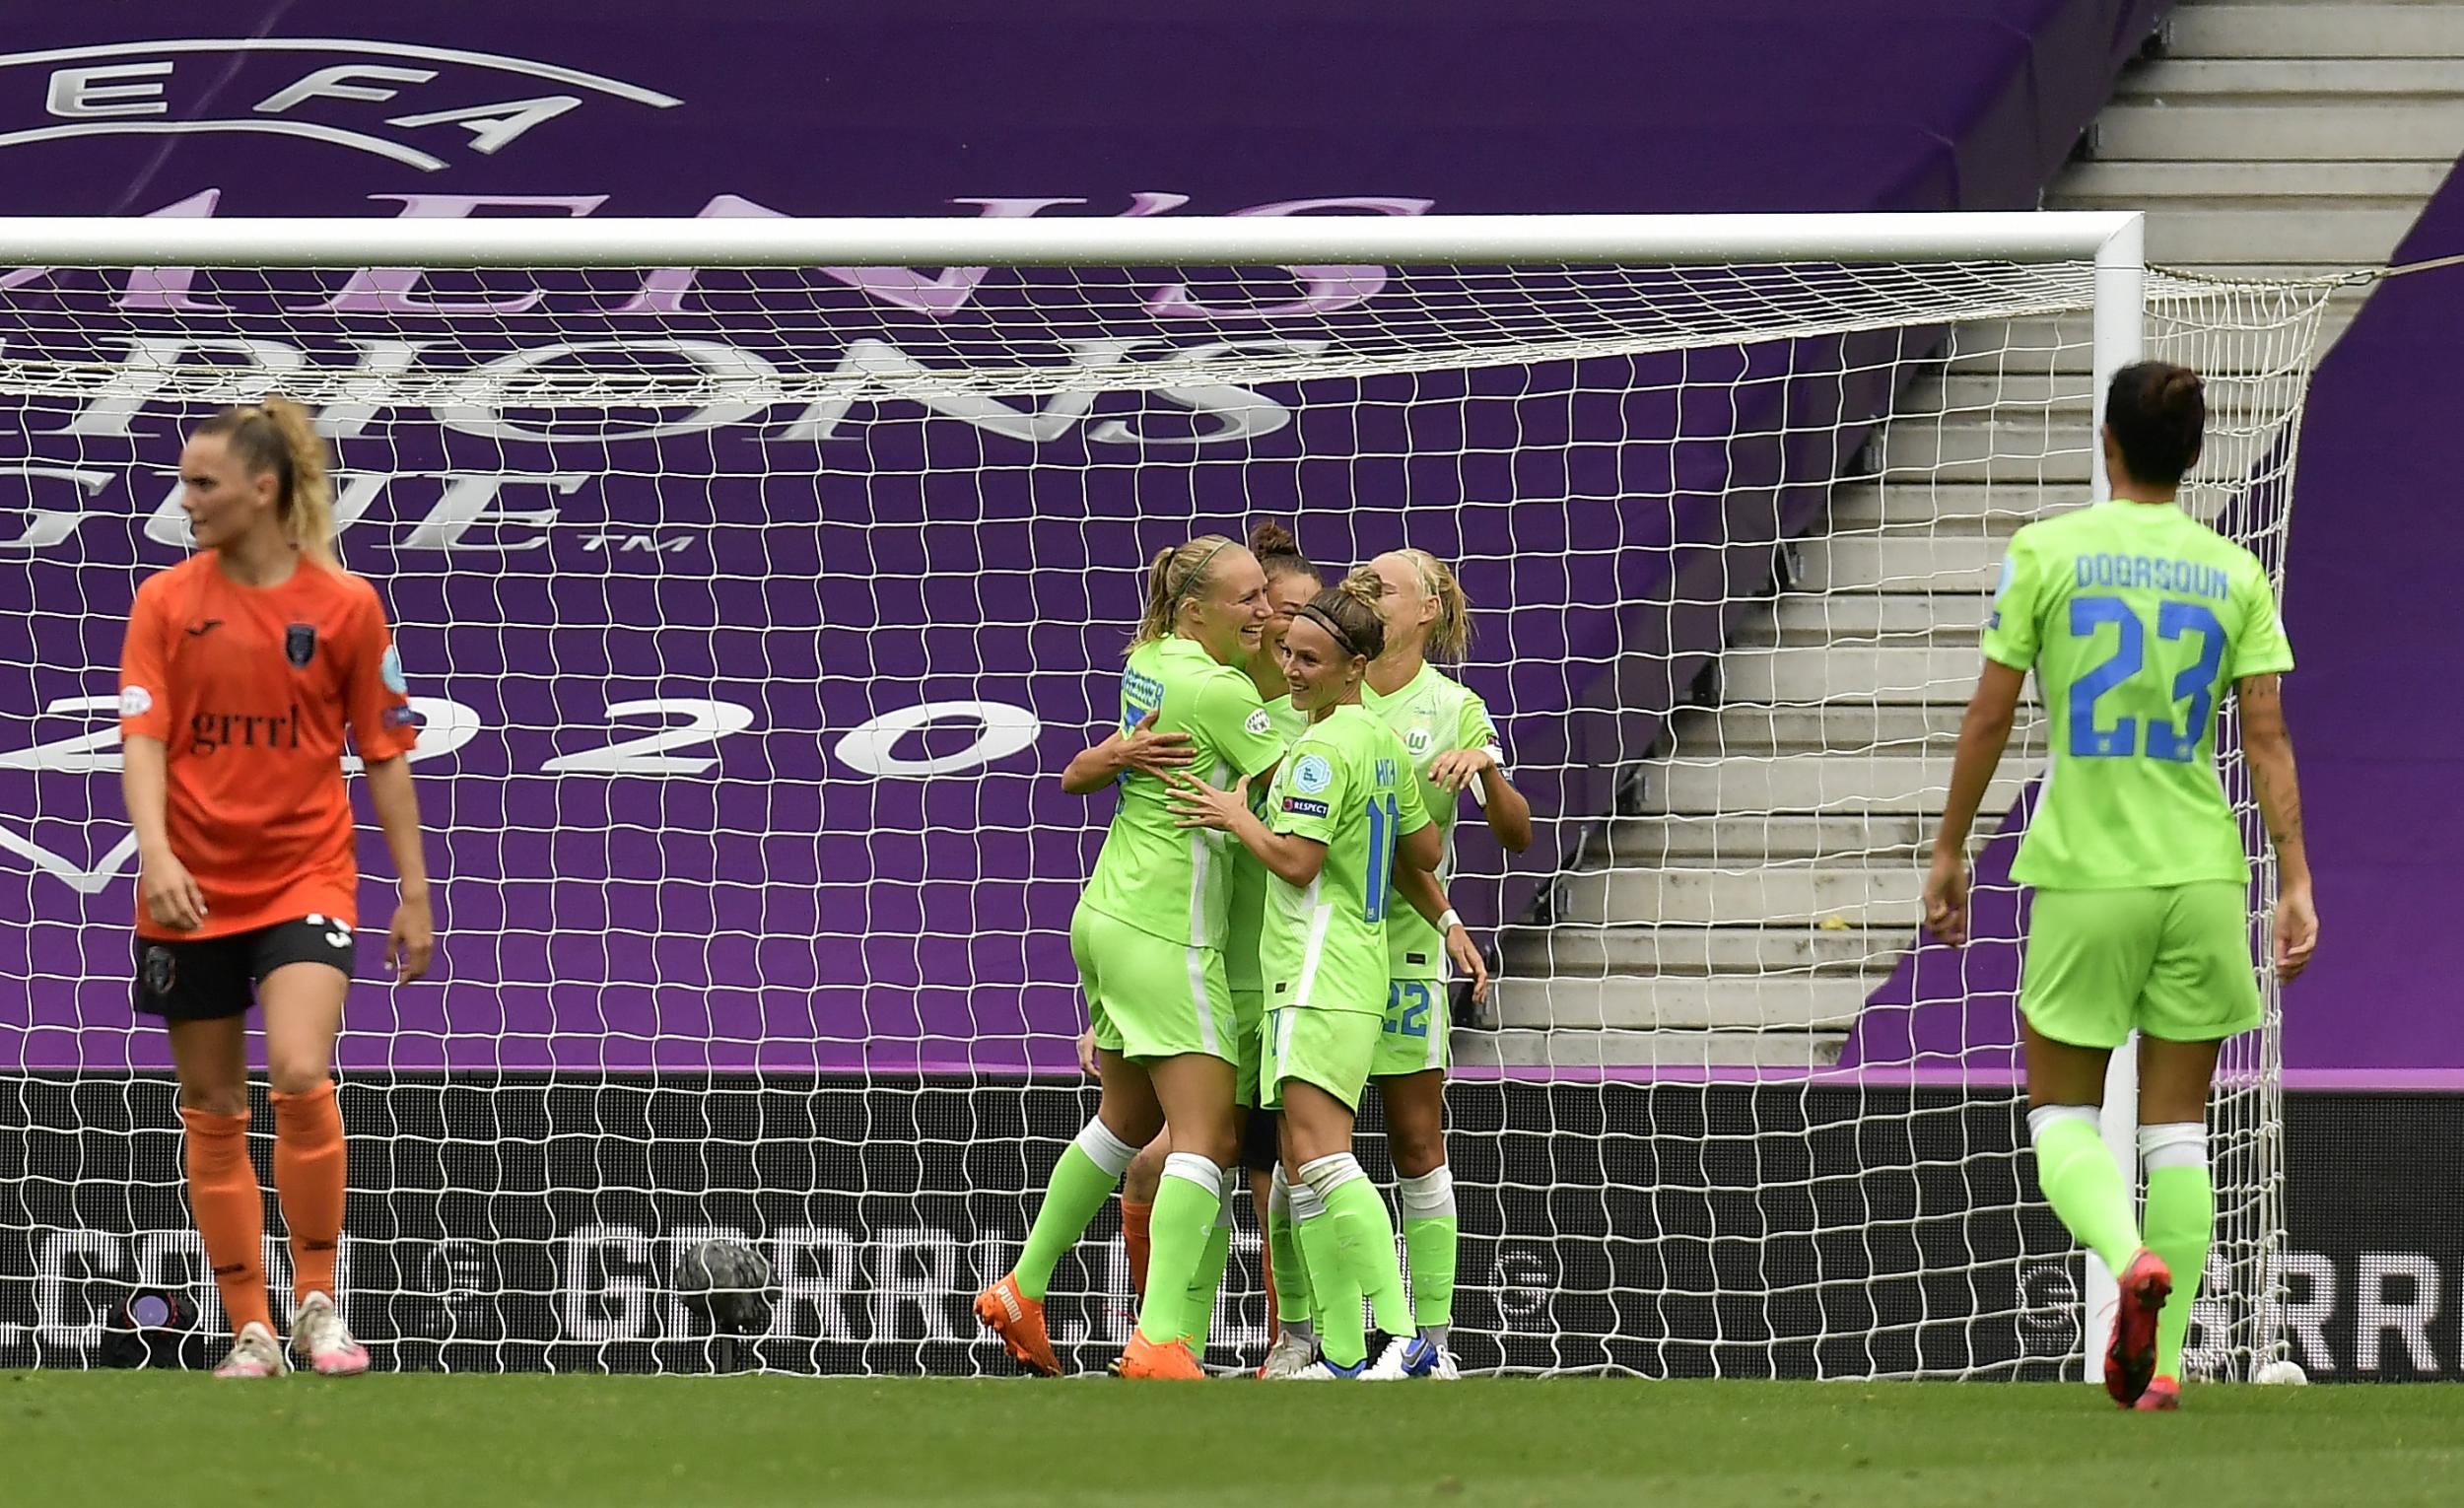 Wolfsburg celebrate another goal against Glasgow City